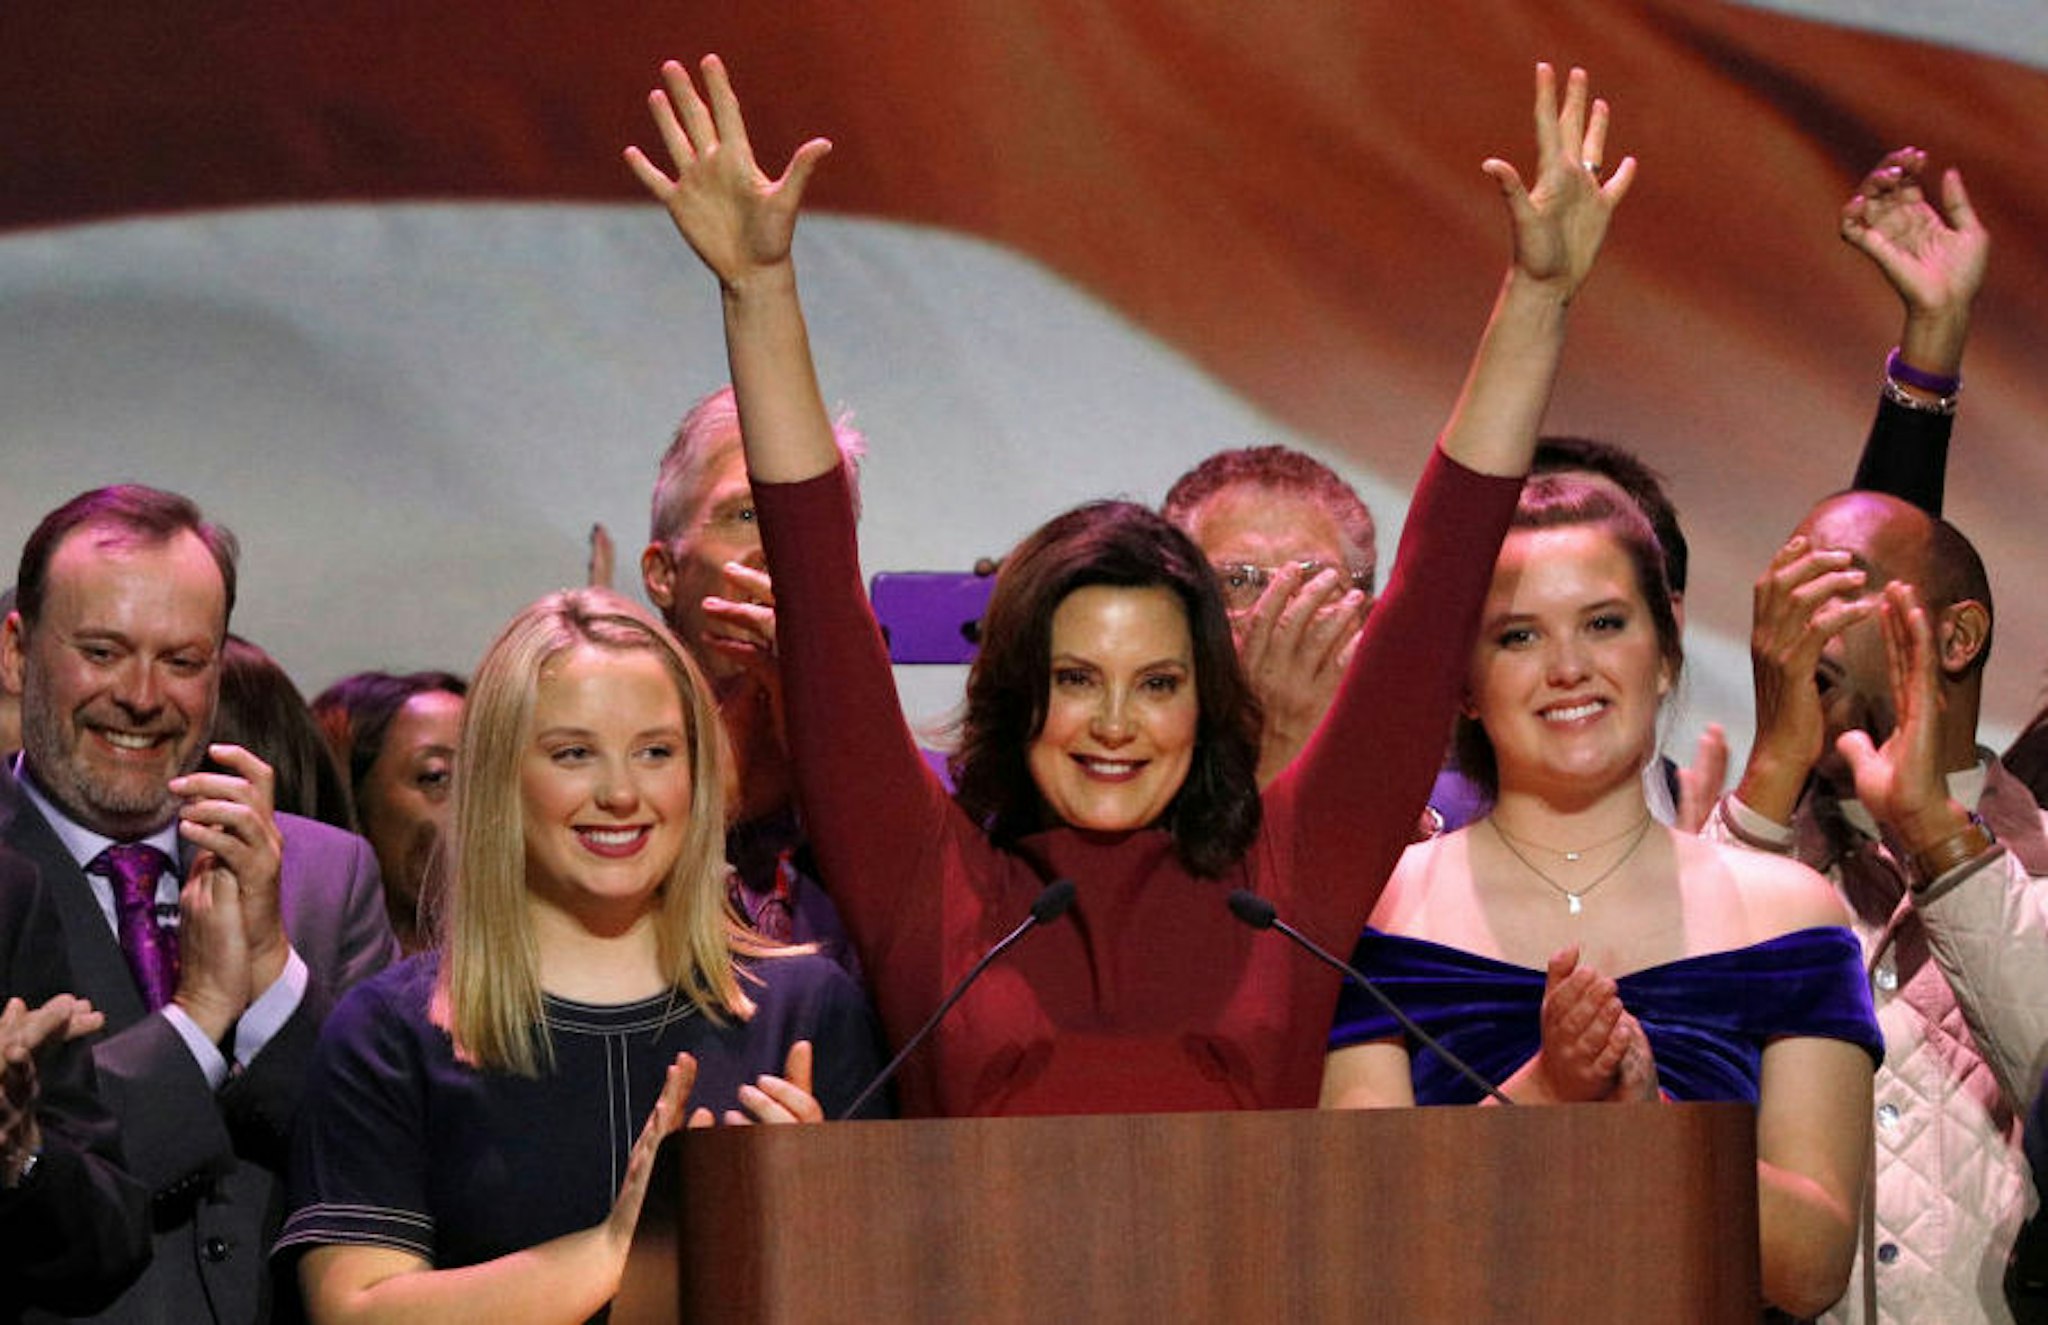 Gov.-elect Gretchen Whitmer speaks at a Democratic election-night party on November 6, 2018 in Detroit, Michigan. Whitmer defeated Republican Bill Schuette to replace outgoing Republican Gov. Rick Snyder.